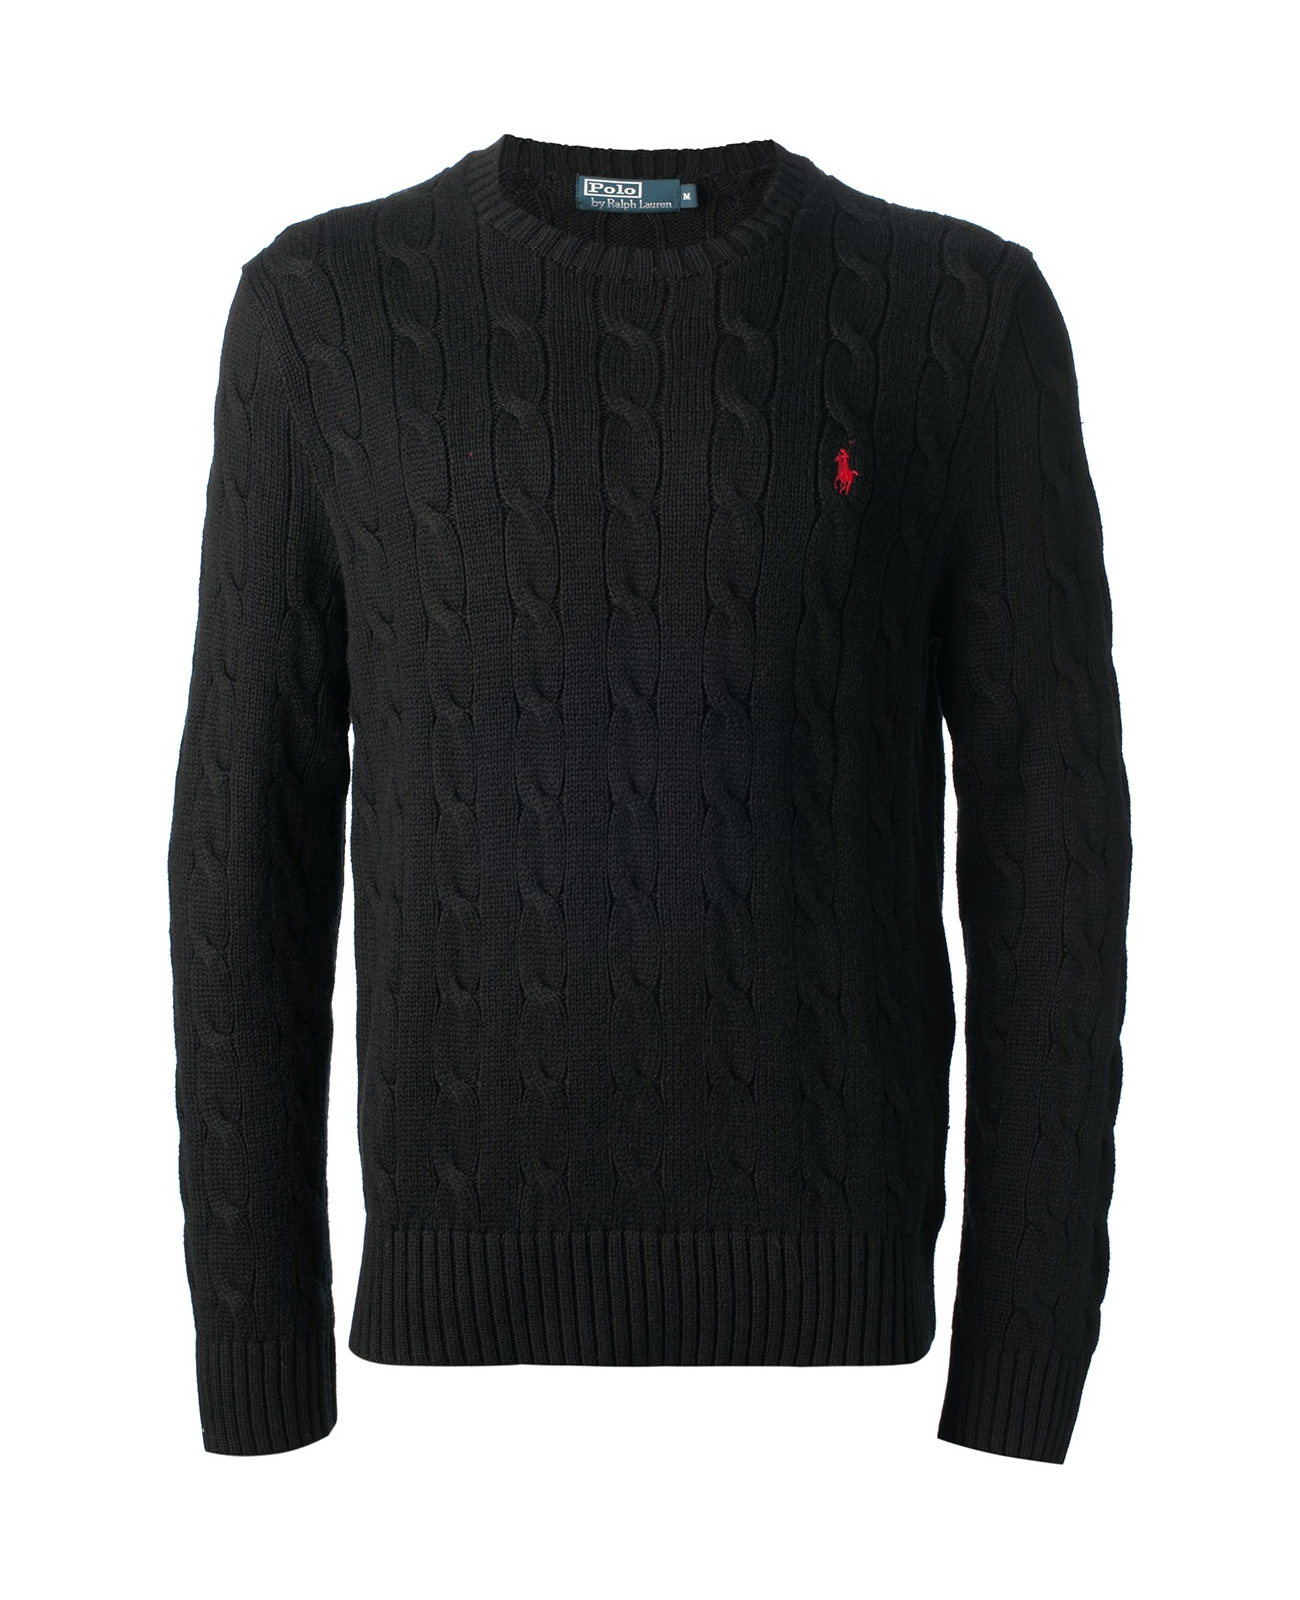 Ralph Lauren Sweater. Long Sleeve Cable Knit Jumper in Black - INTOTO7 ...